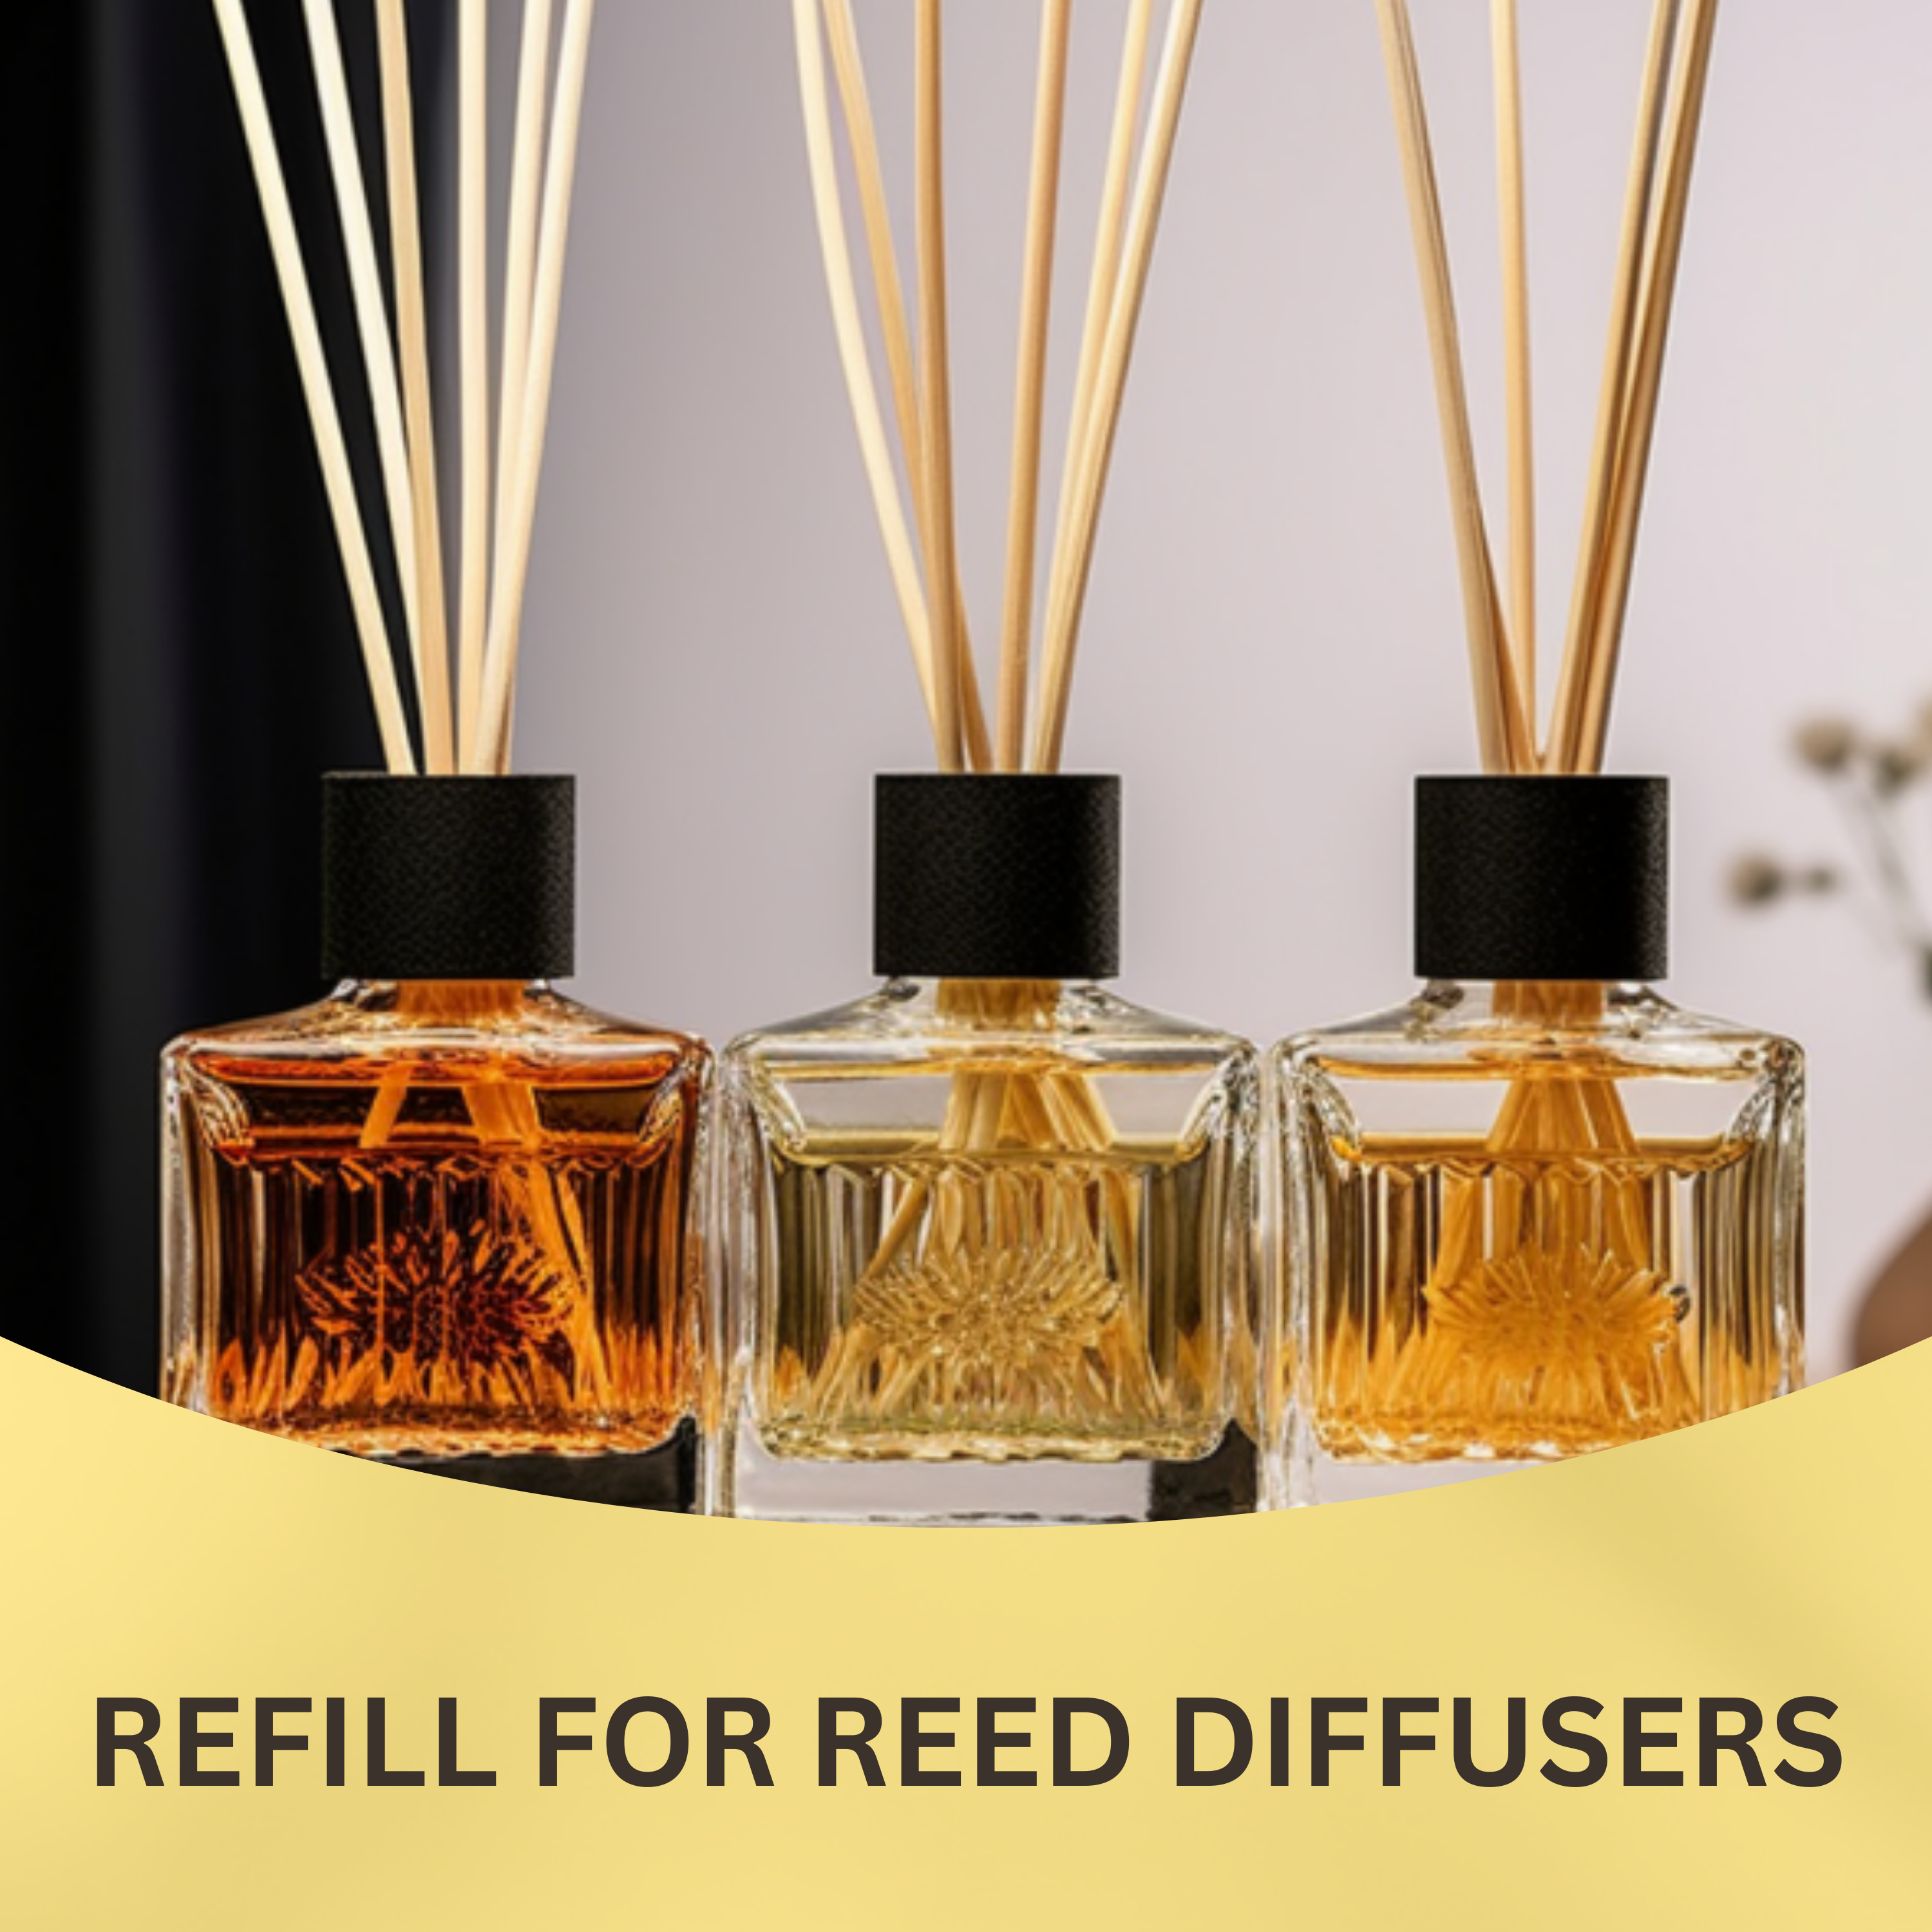 Black Canyon Coconut Ginger Scented Reed Diffuser Oil Refill